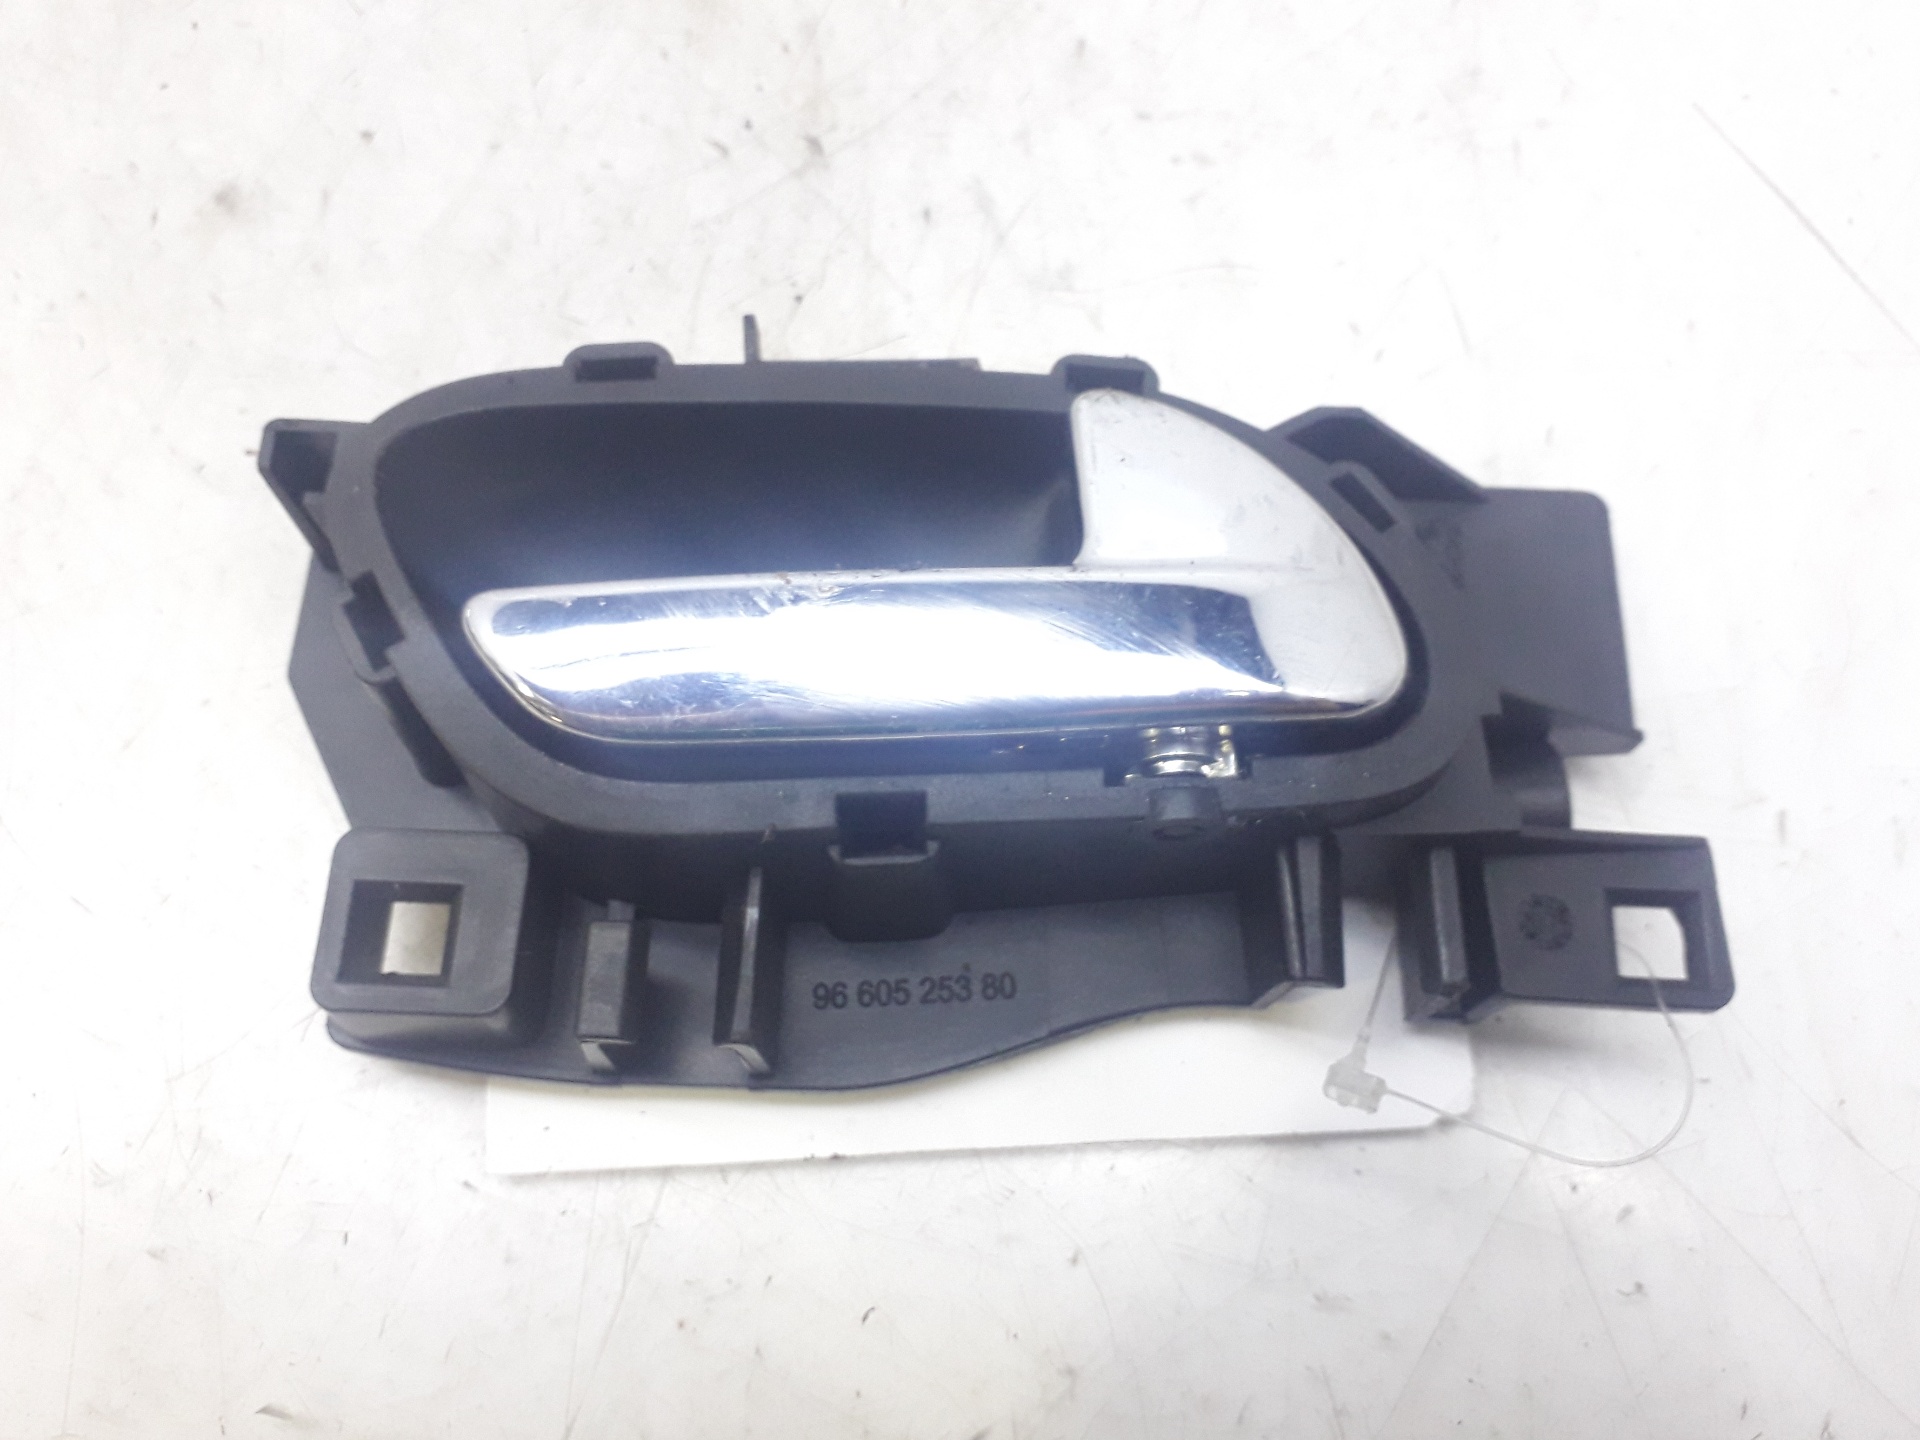 PEUGEOT 308 T7 (2007-2015) Other Interior Parts 9660525380 22019983